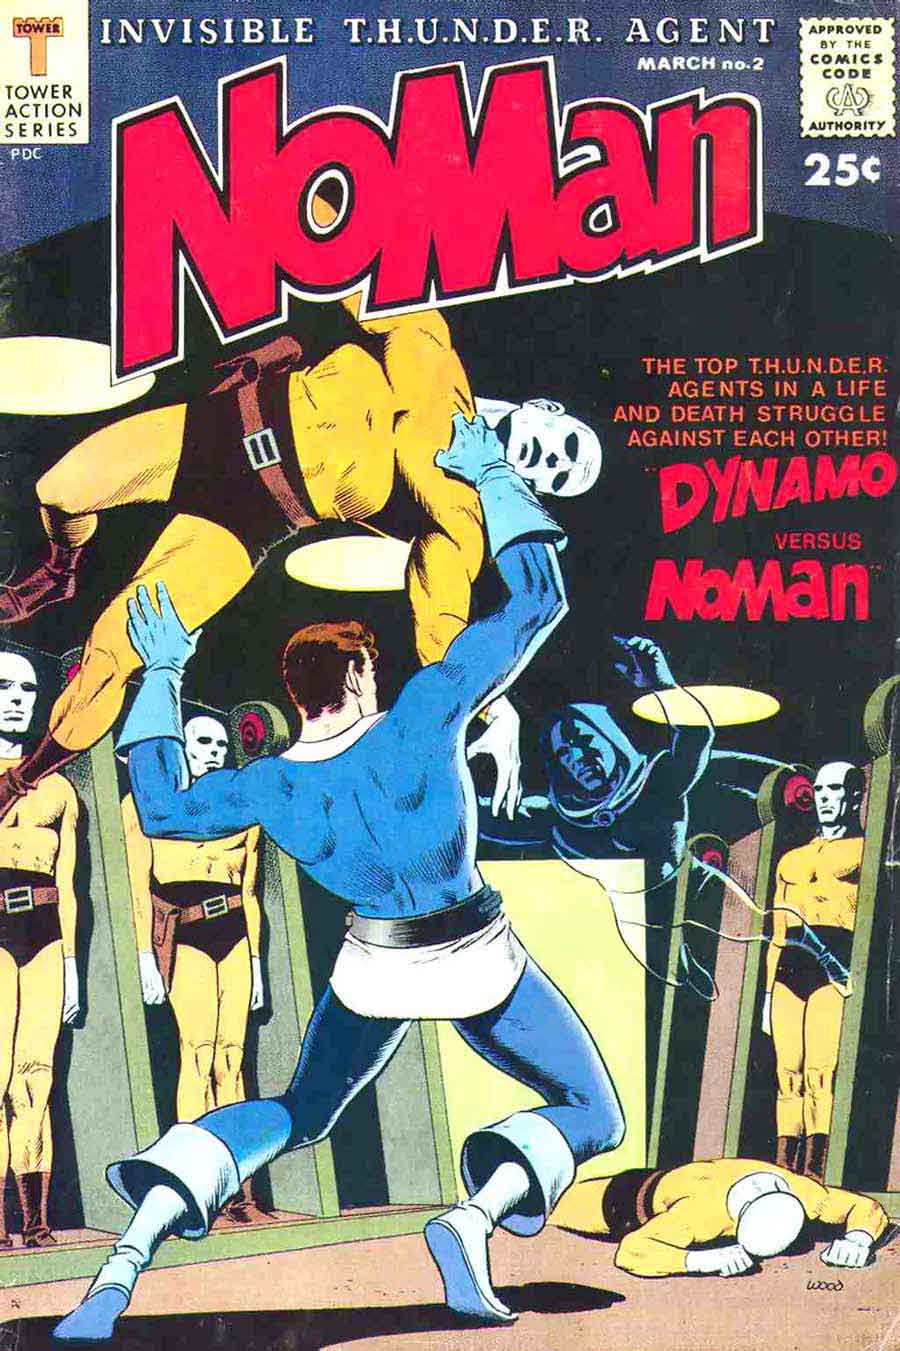 Noman v1 #2 - Wally Wood tower silver age 1960s comic book cover art